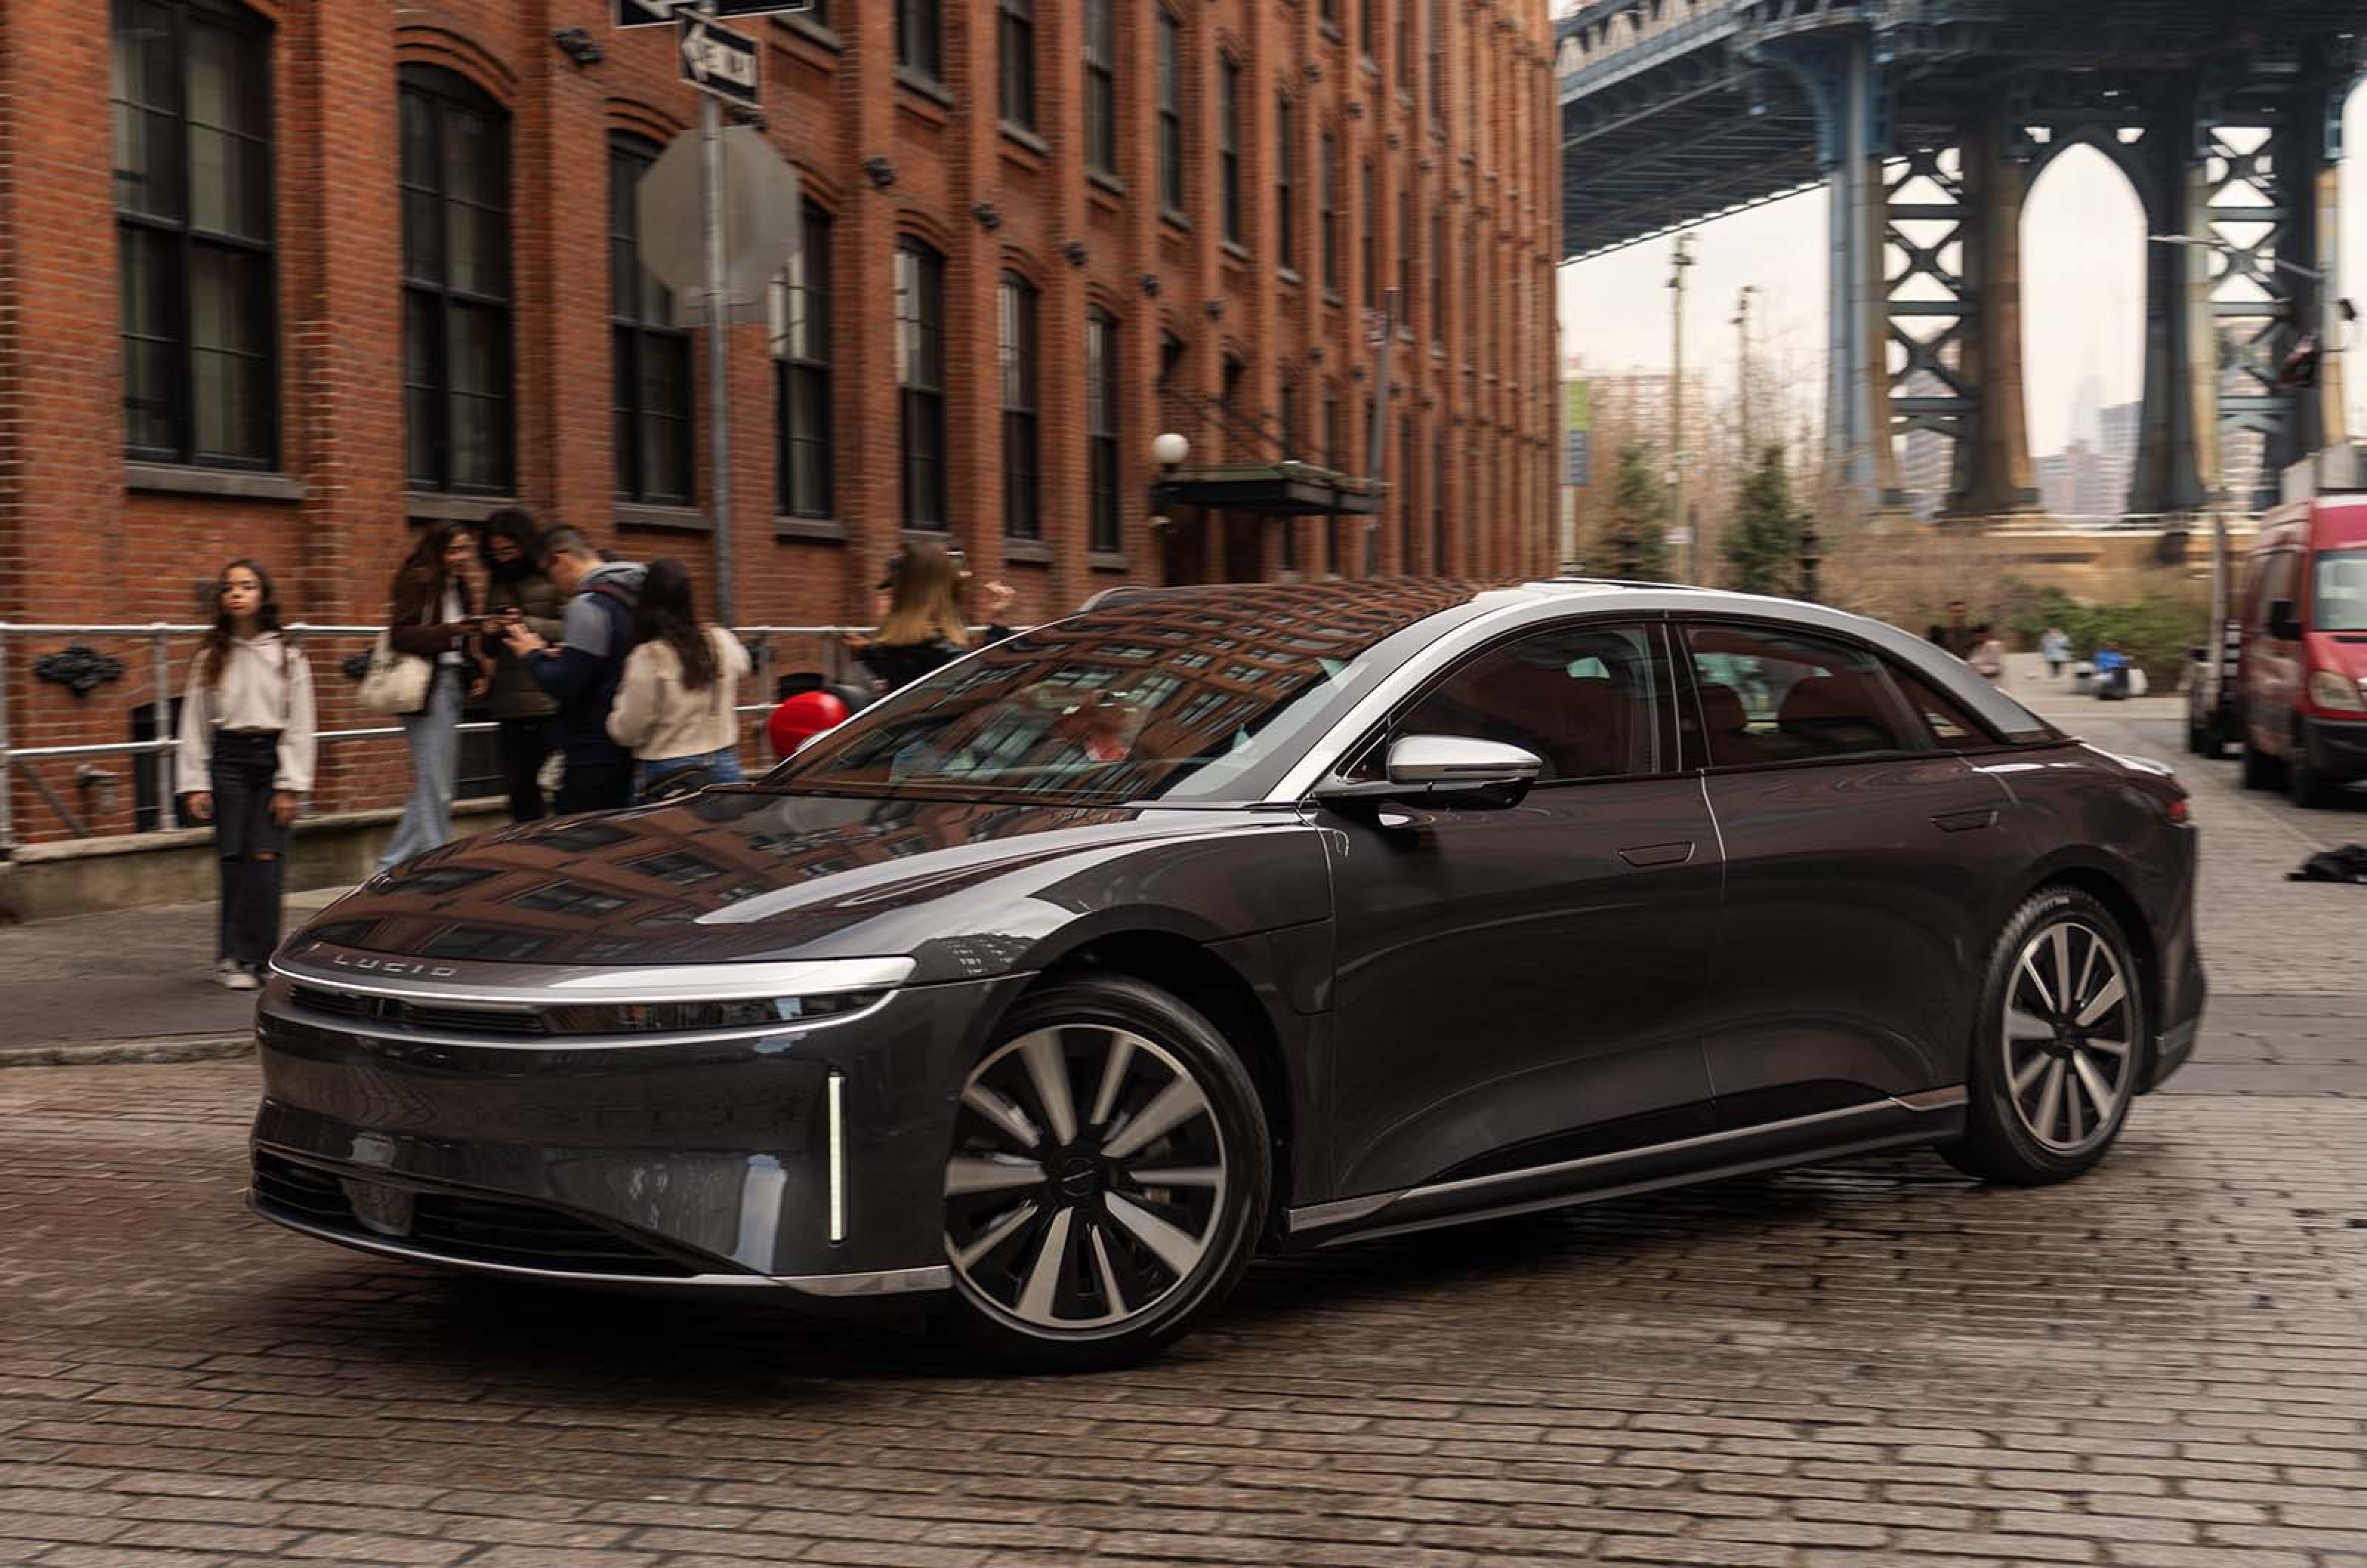 11 electric car startups you should watch out for